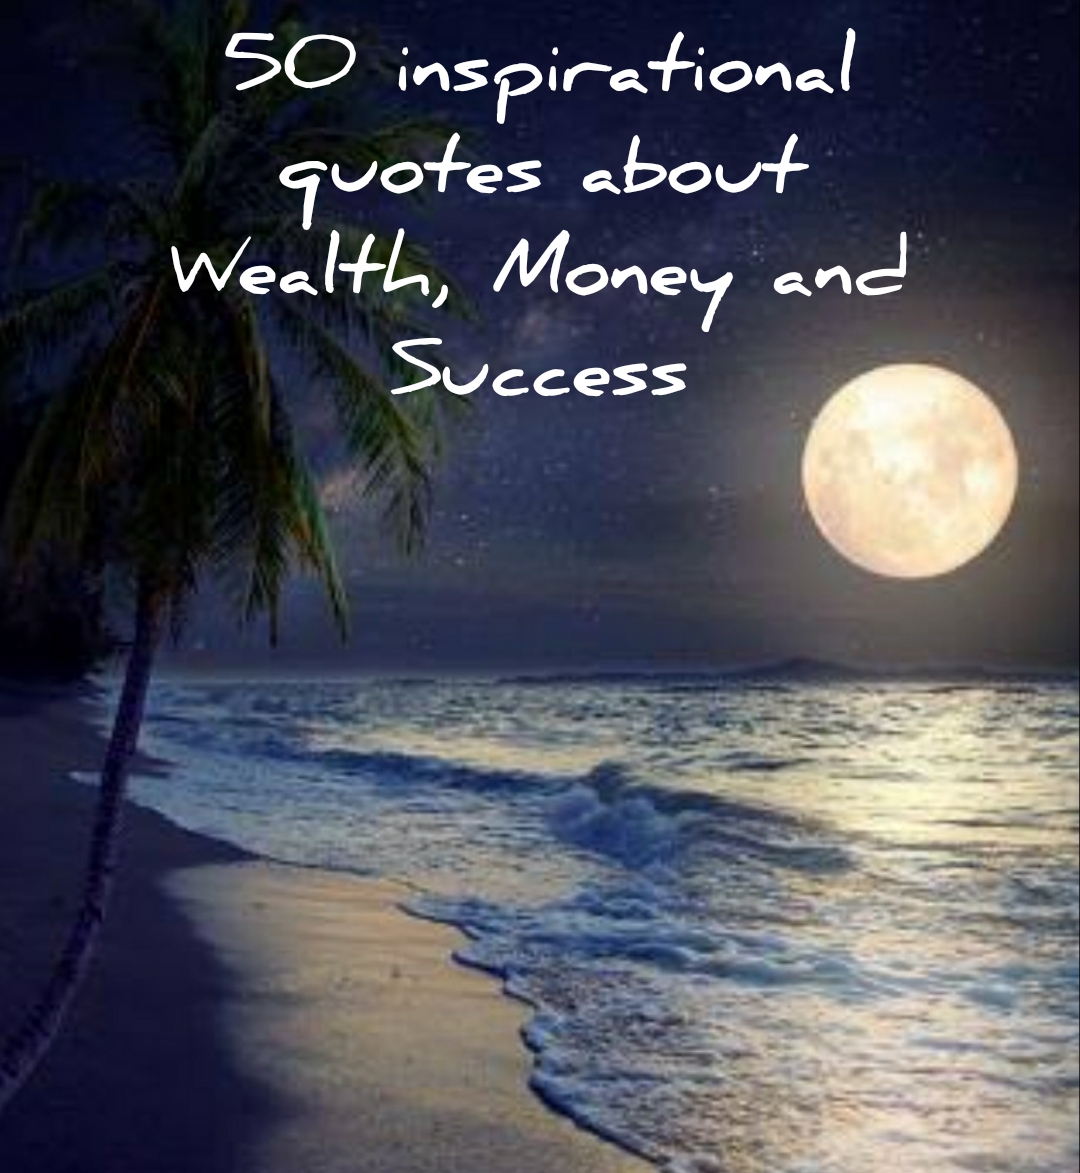 50 Inspirational Quotes about Wealth, Money and Success